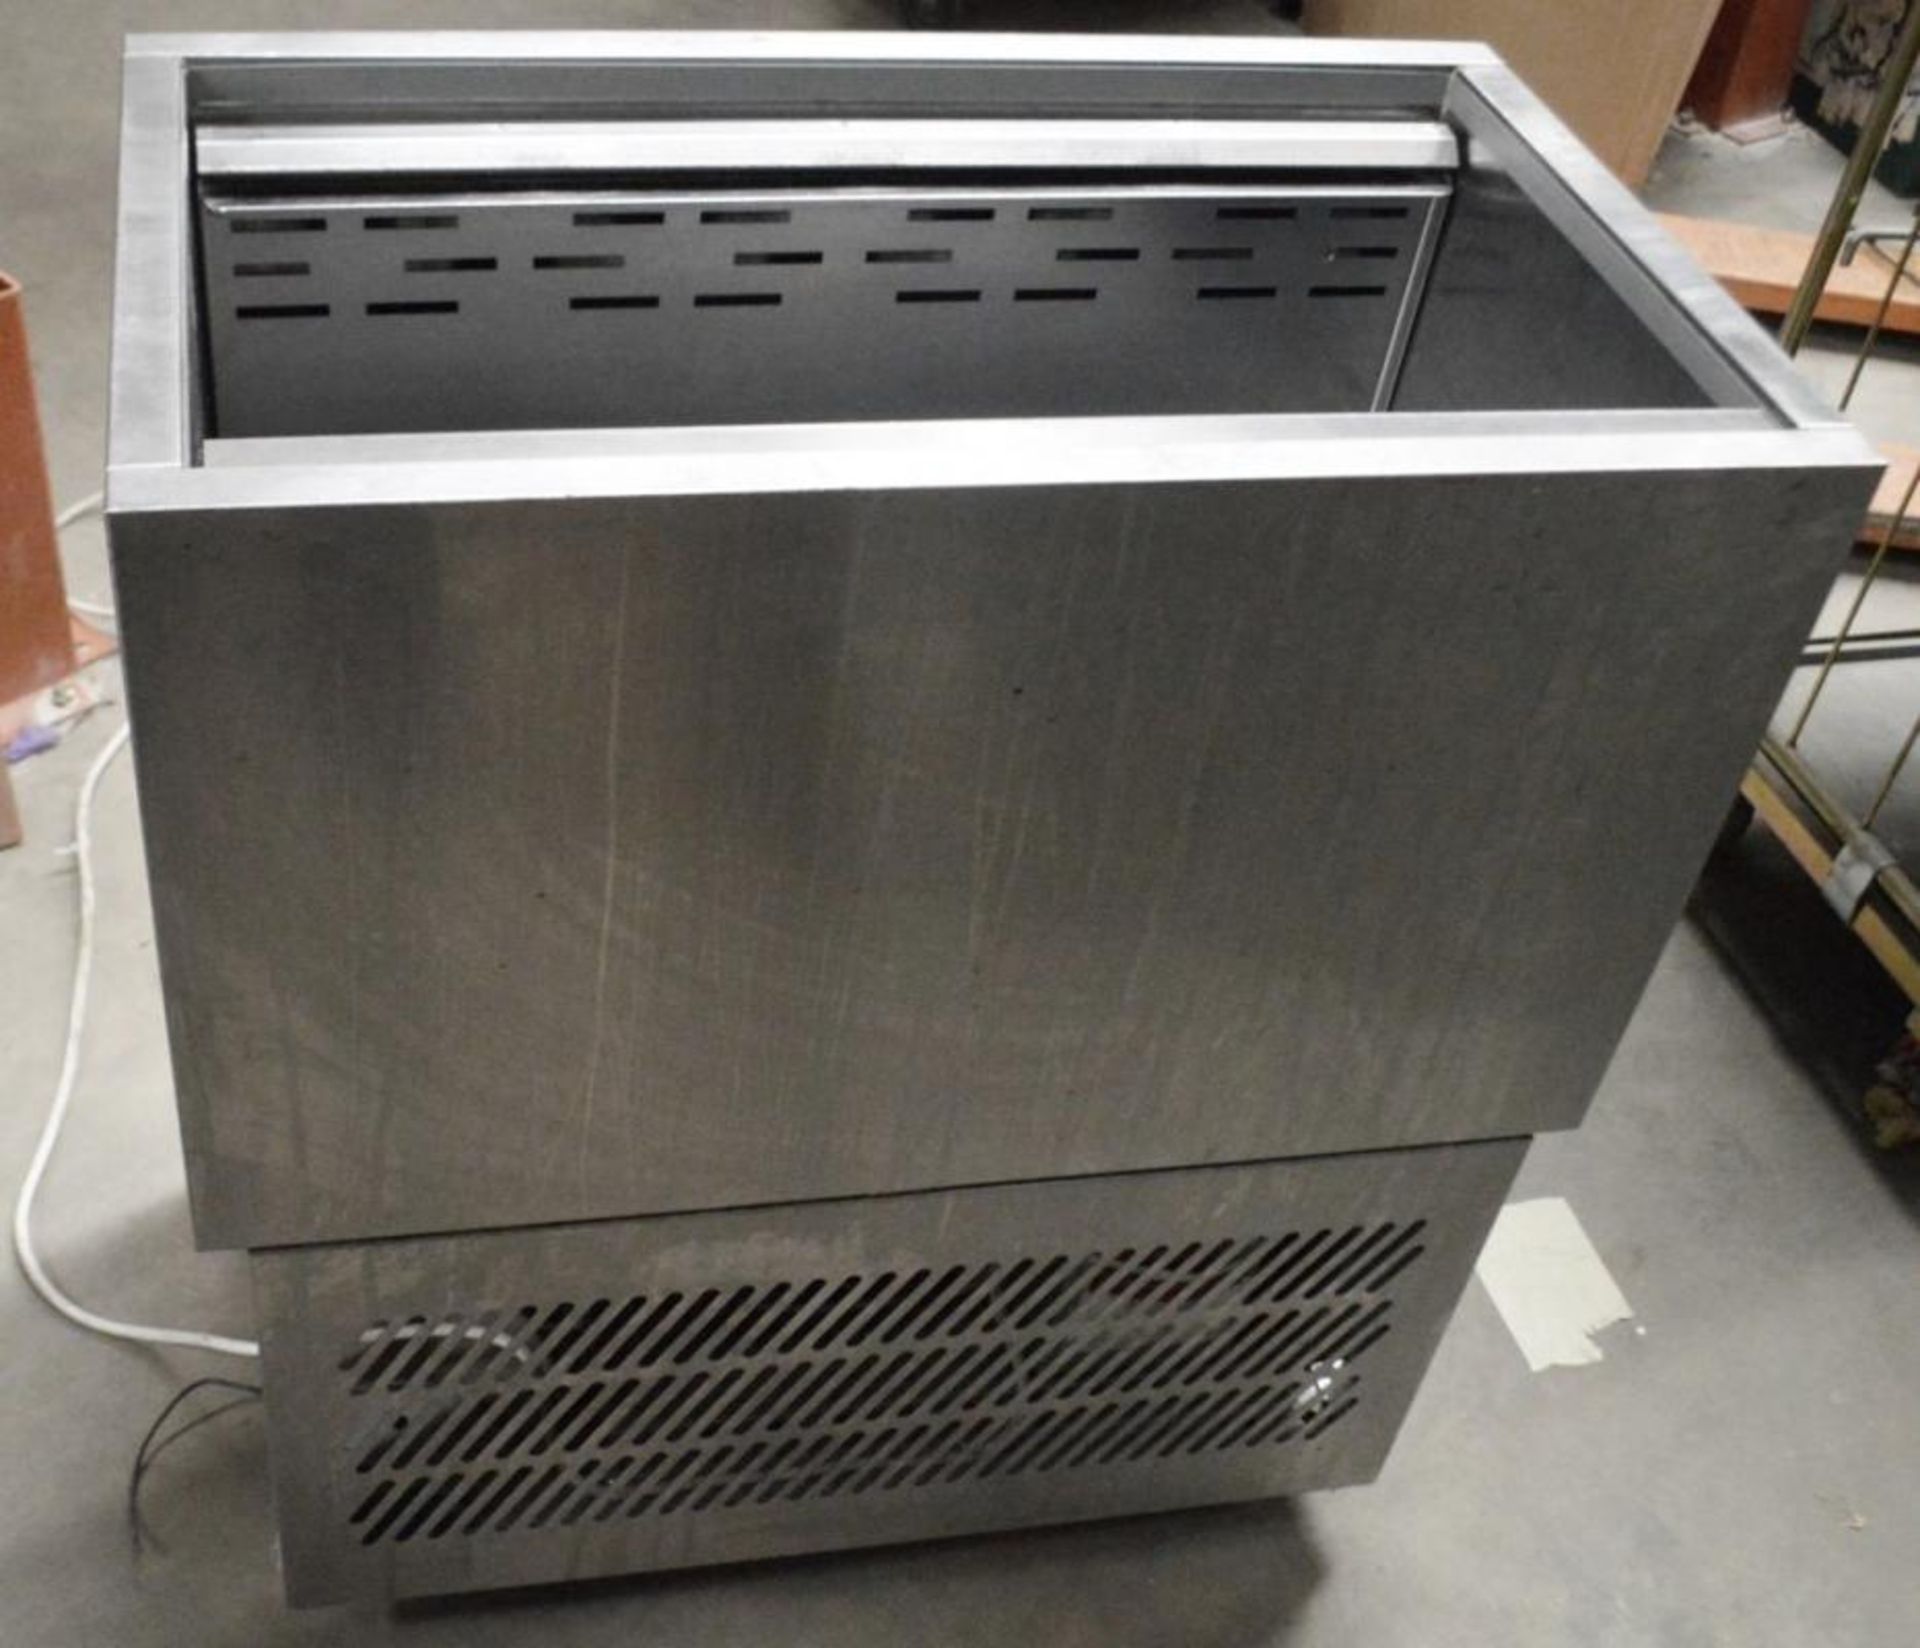 1 x Williams PW4/R290 Refrigerated Prep Well With 4 x Gastro Pans - Dimensions: H88 x W77 x D45cm - - Image 3 of 8